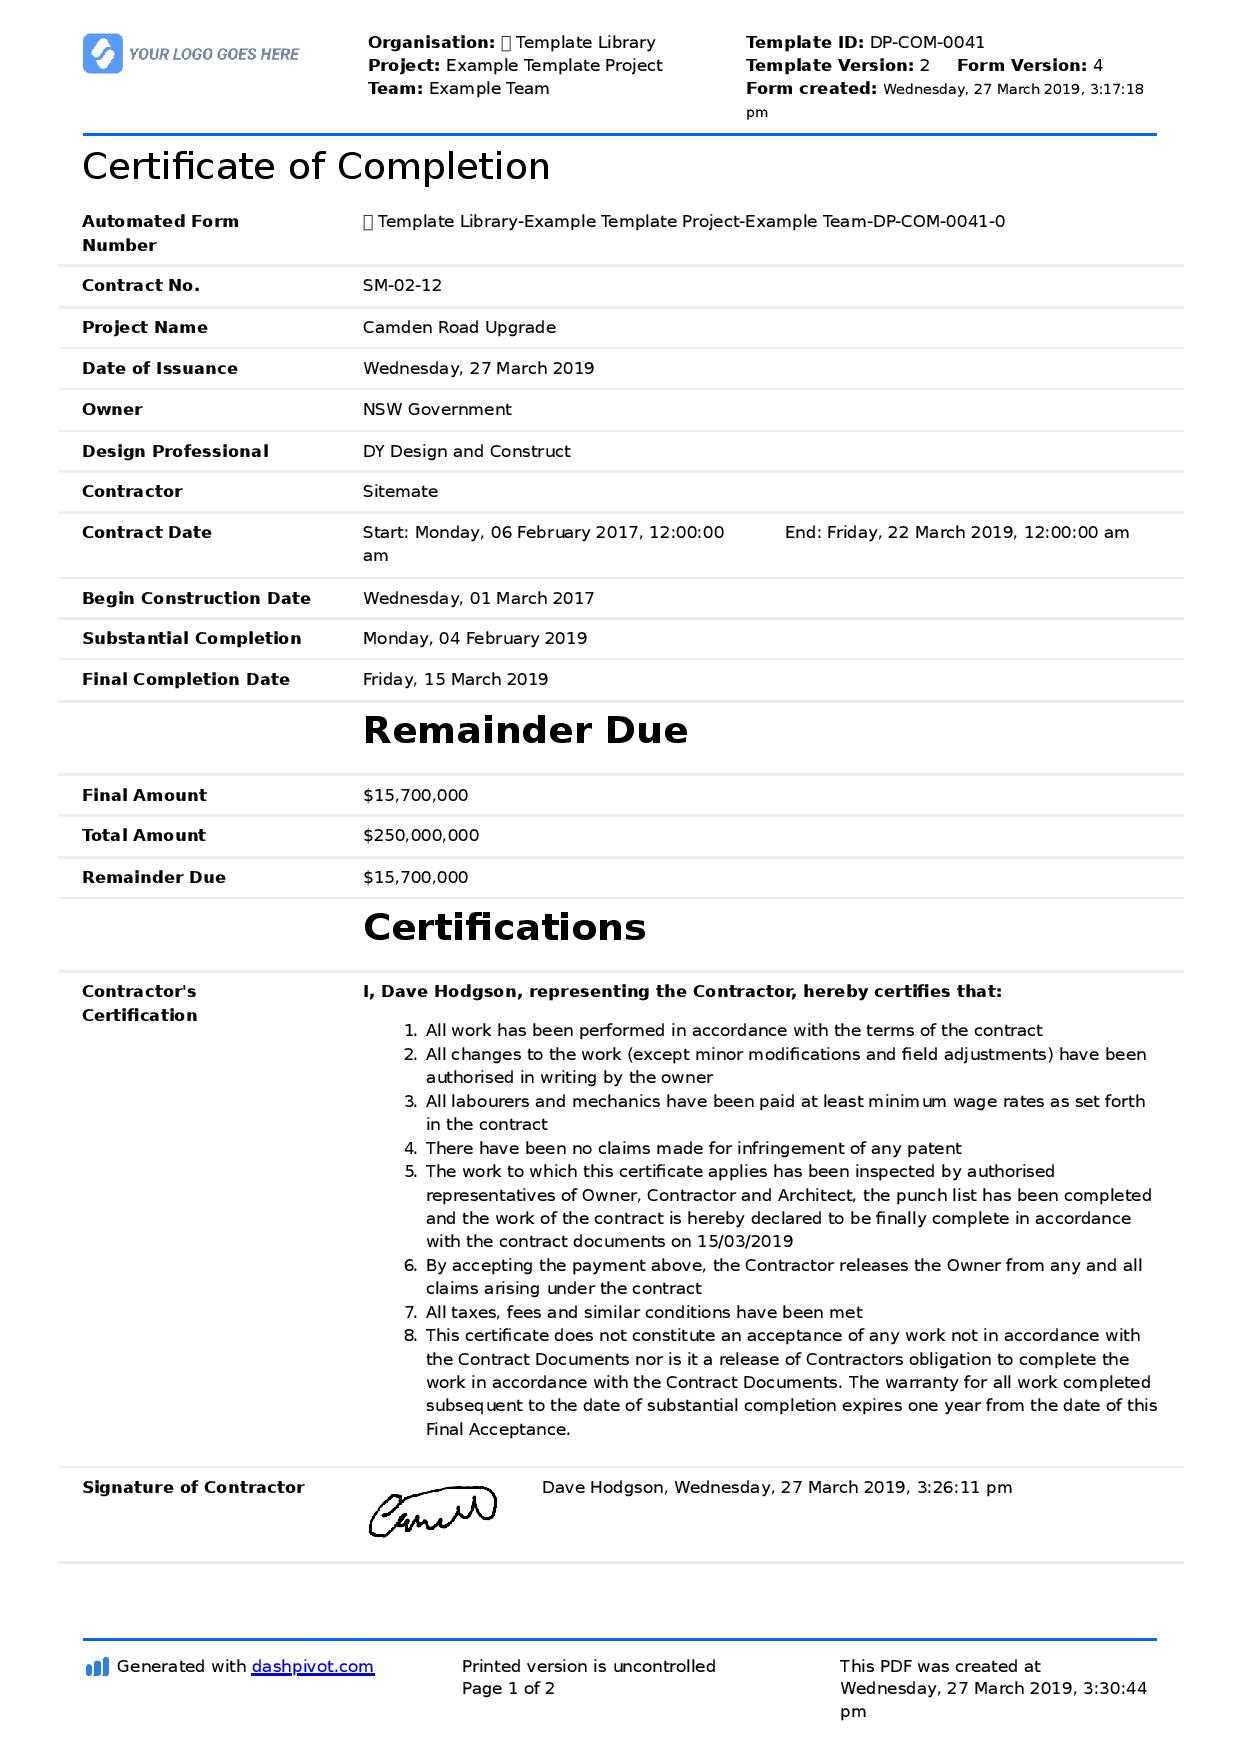 Sample Of Certificate Of Completion Of Construction Project In Jct Practical Completion Certificate Template